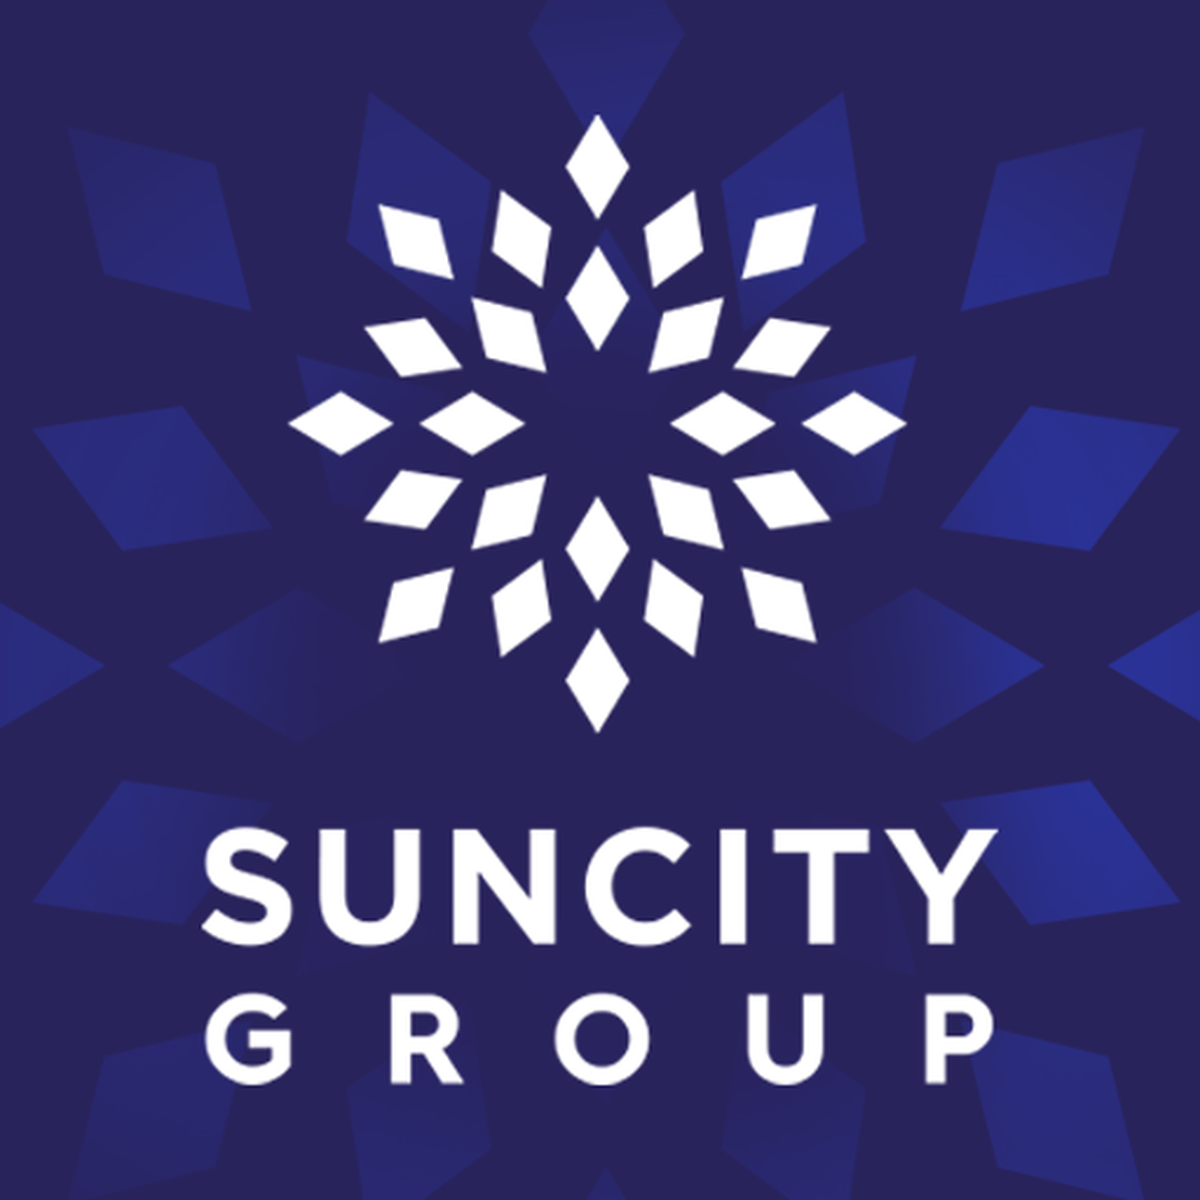 Pt Indraco (suncity Group) is hiring a Marketing Manager ...